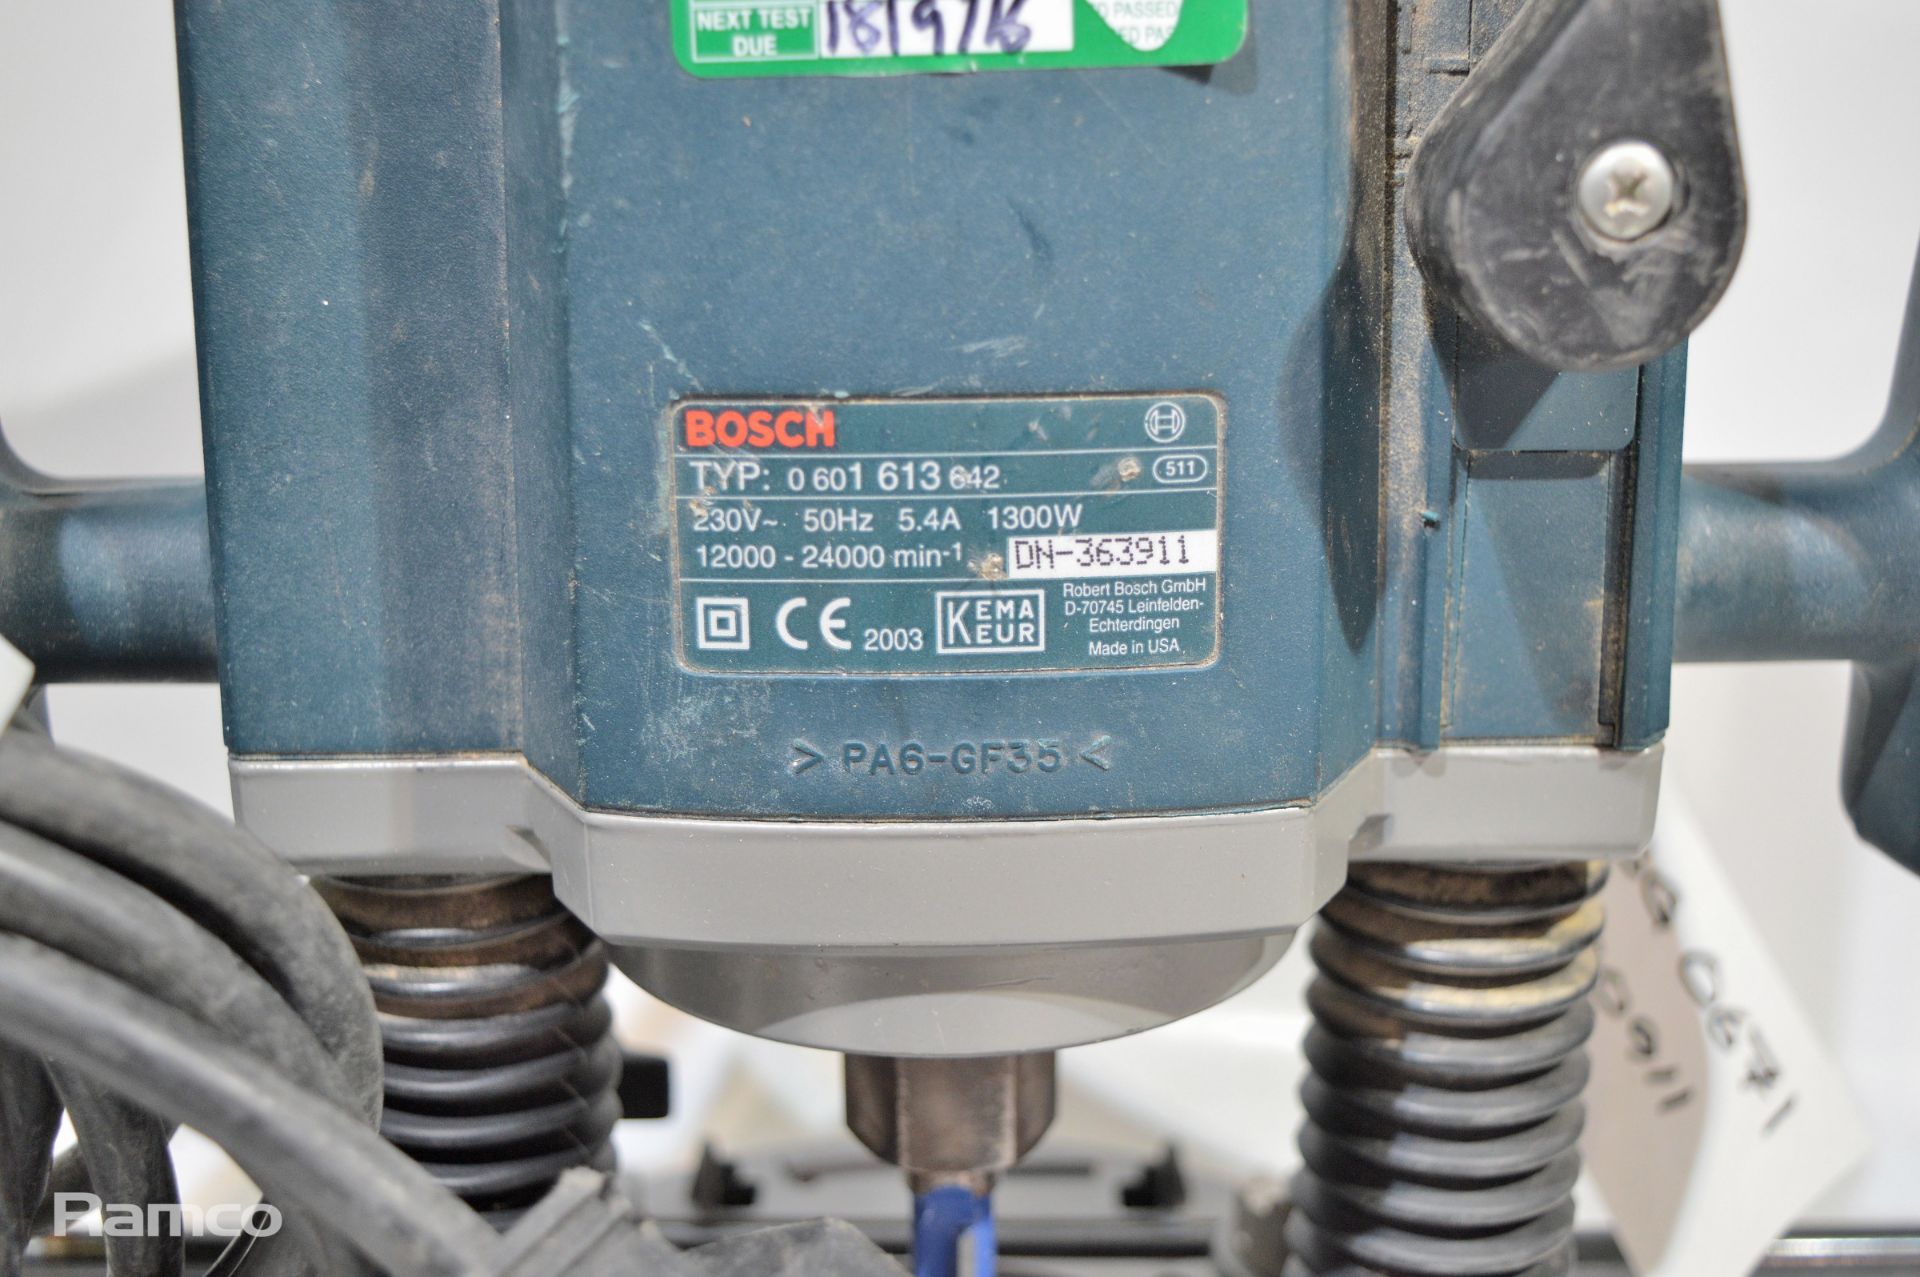 Bosch GOF 1300 CE router with accessories 230v - Image 4 of 10